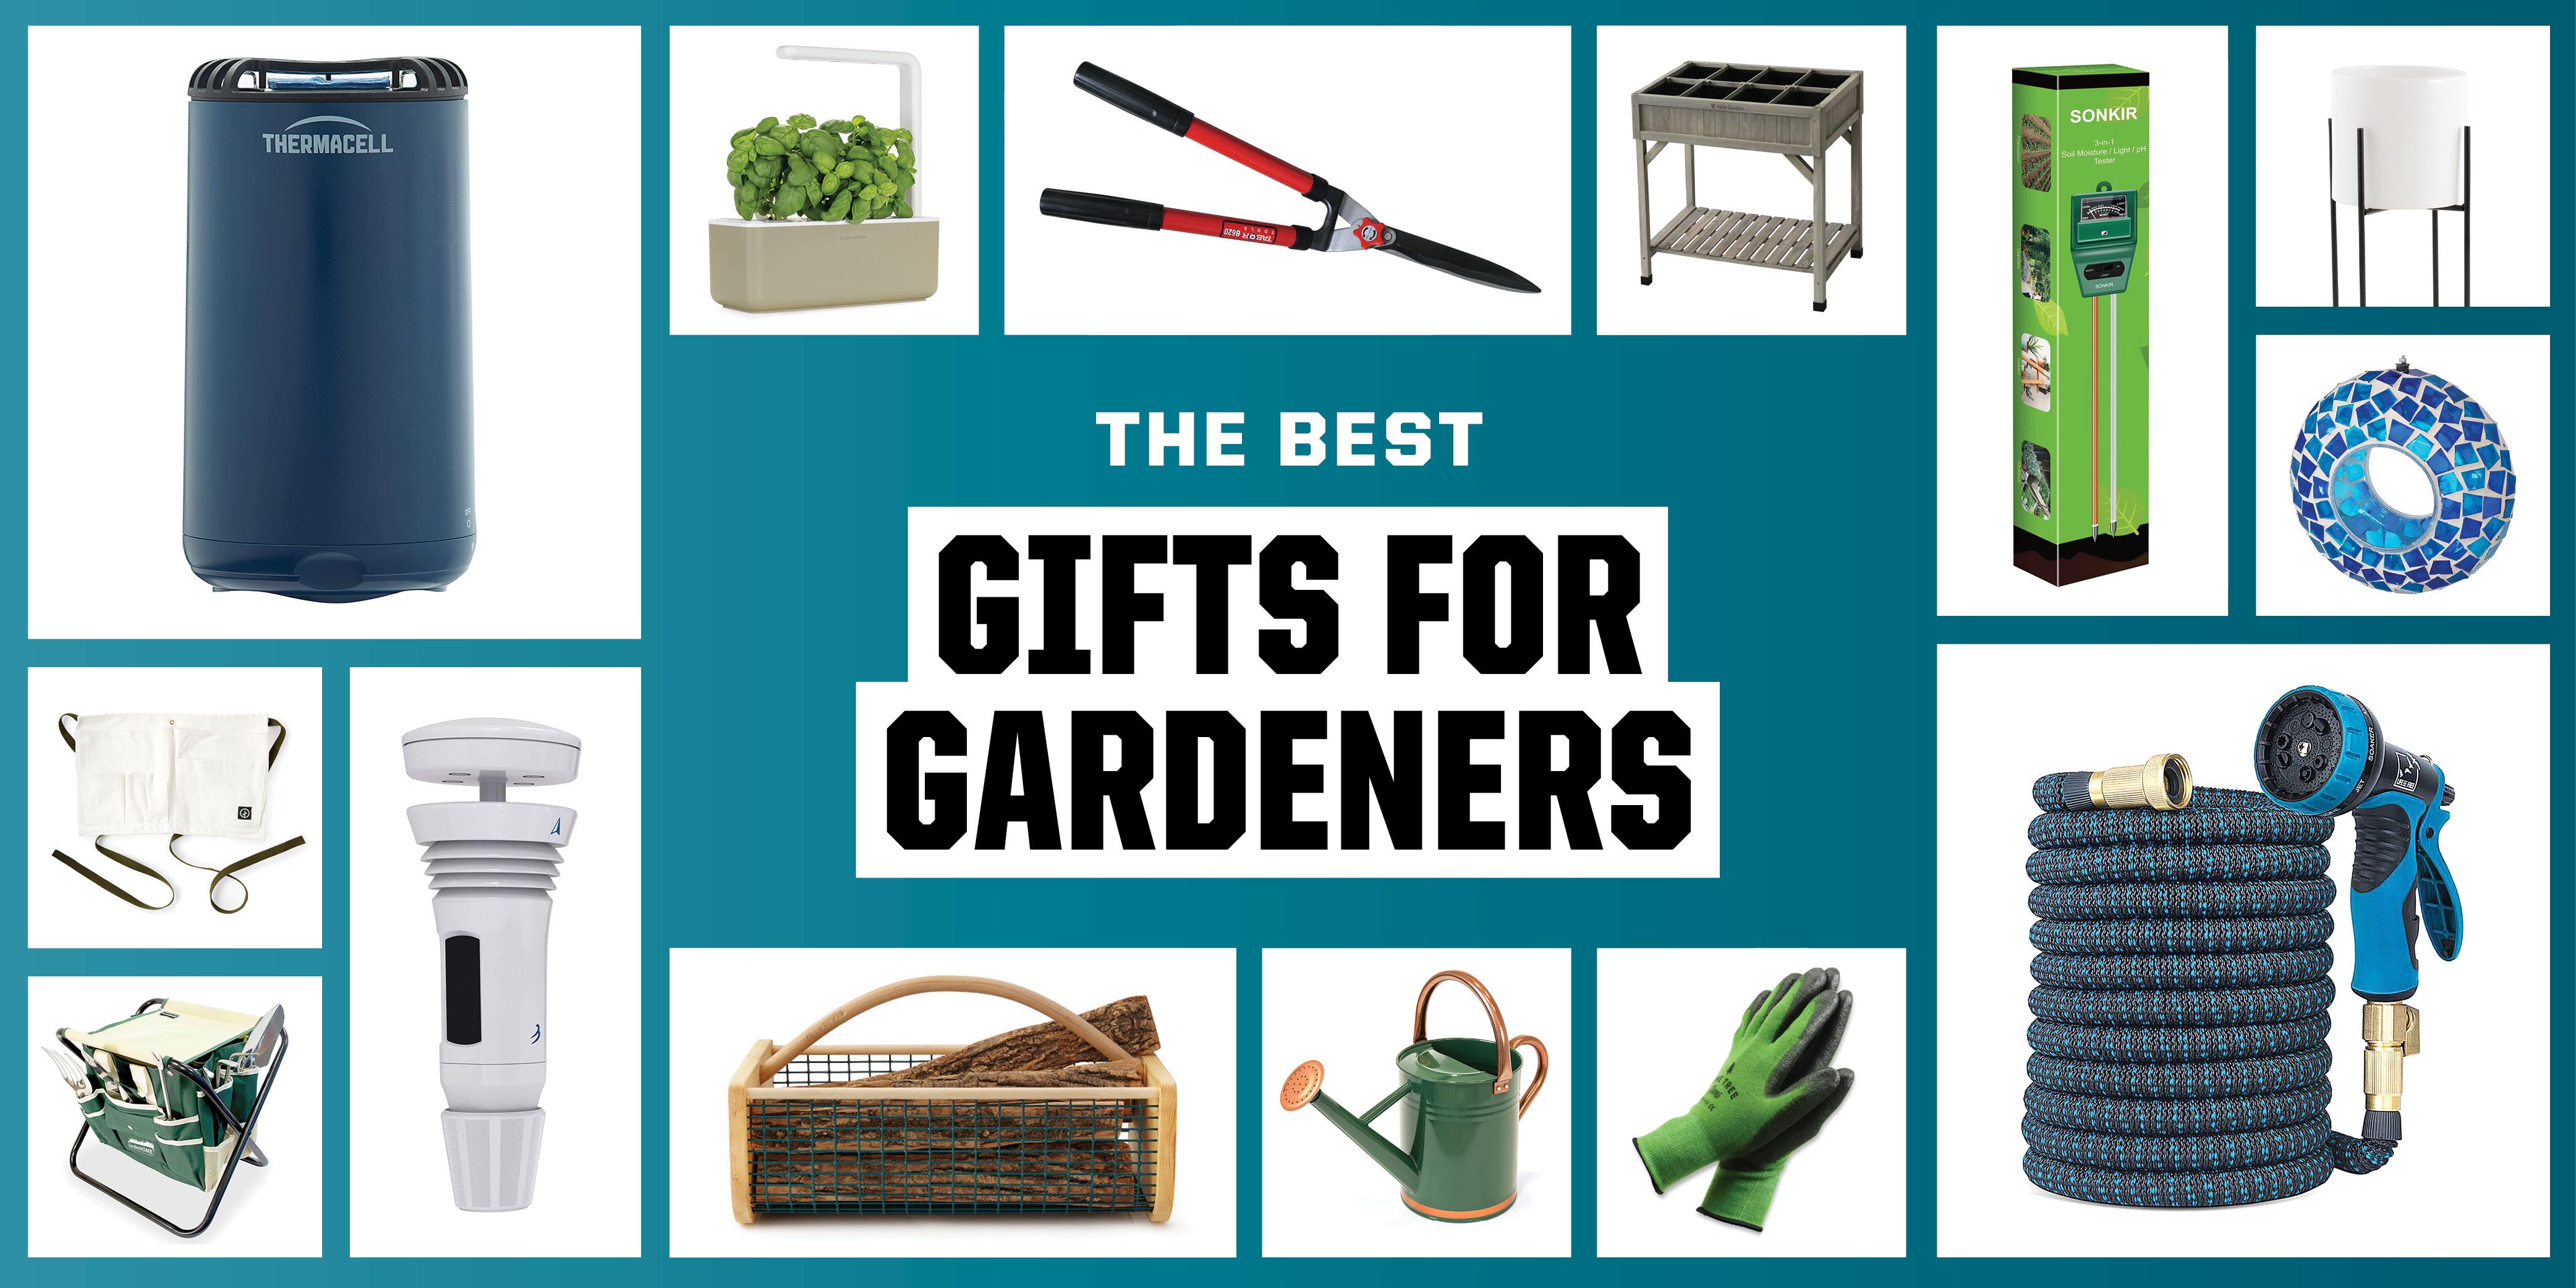 The Best Christmas Gardening Gifts (Useful & Unique Items)